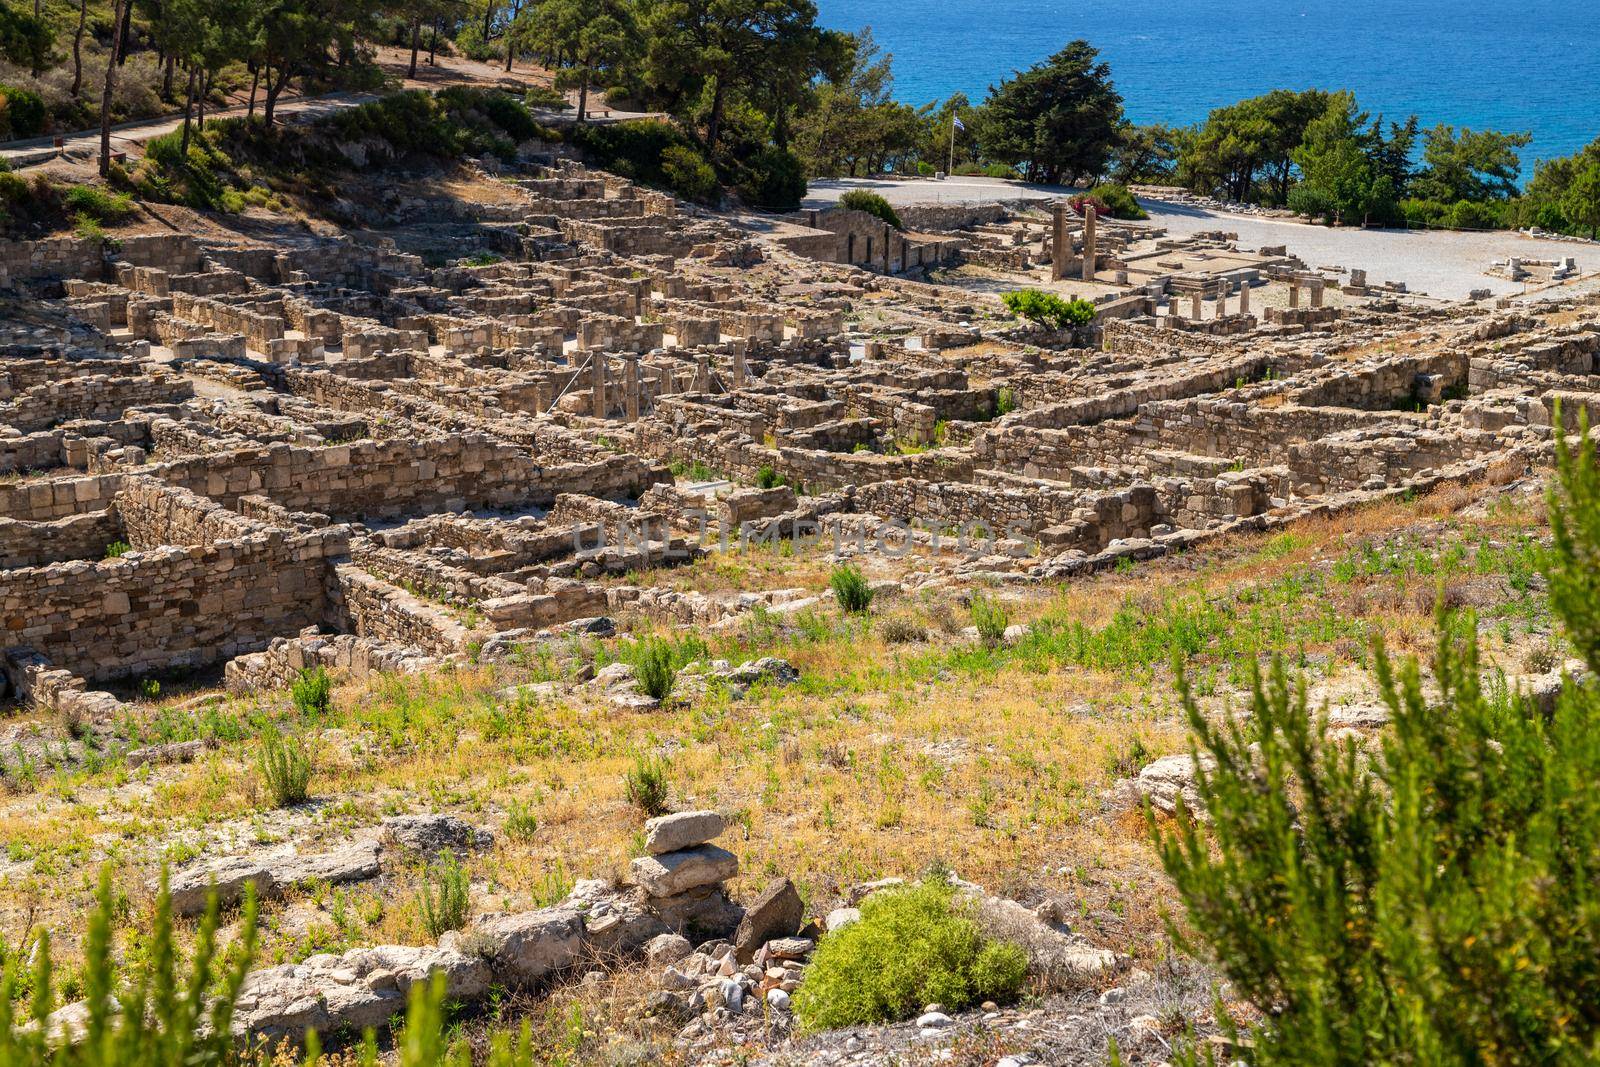 Excavation site of the ancient city of Kamiros (Kameiros) at the westside of Rhodes island, Greece